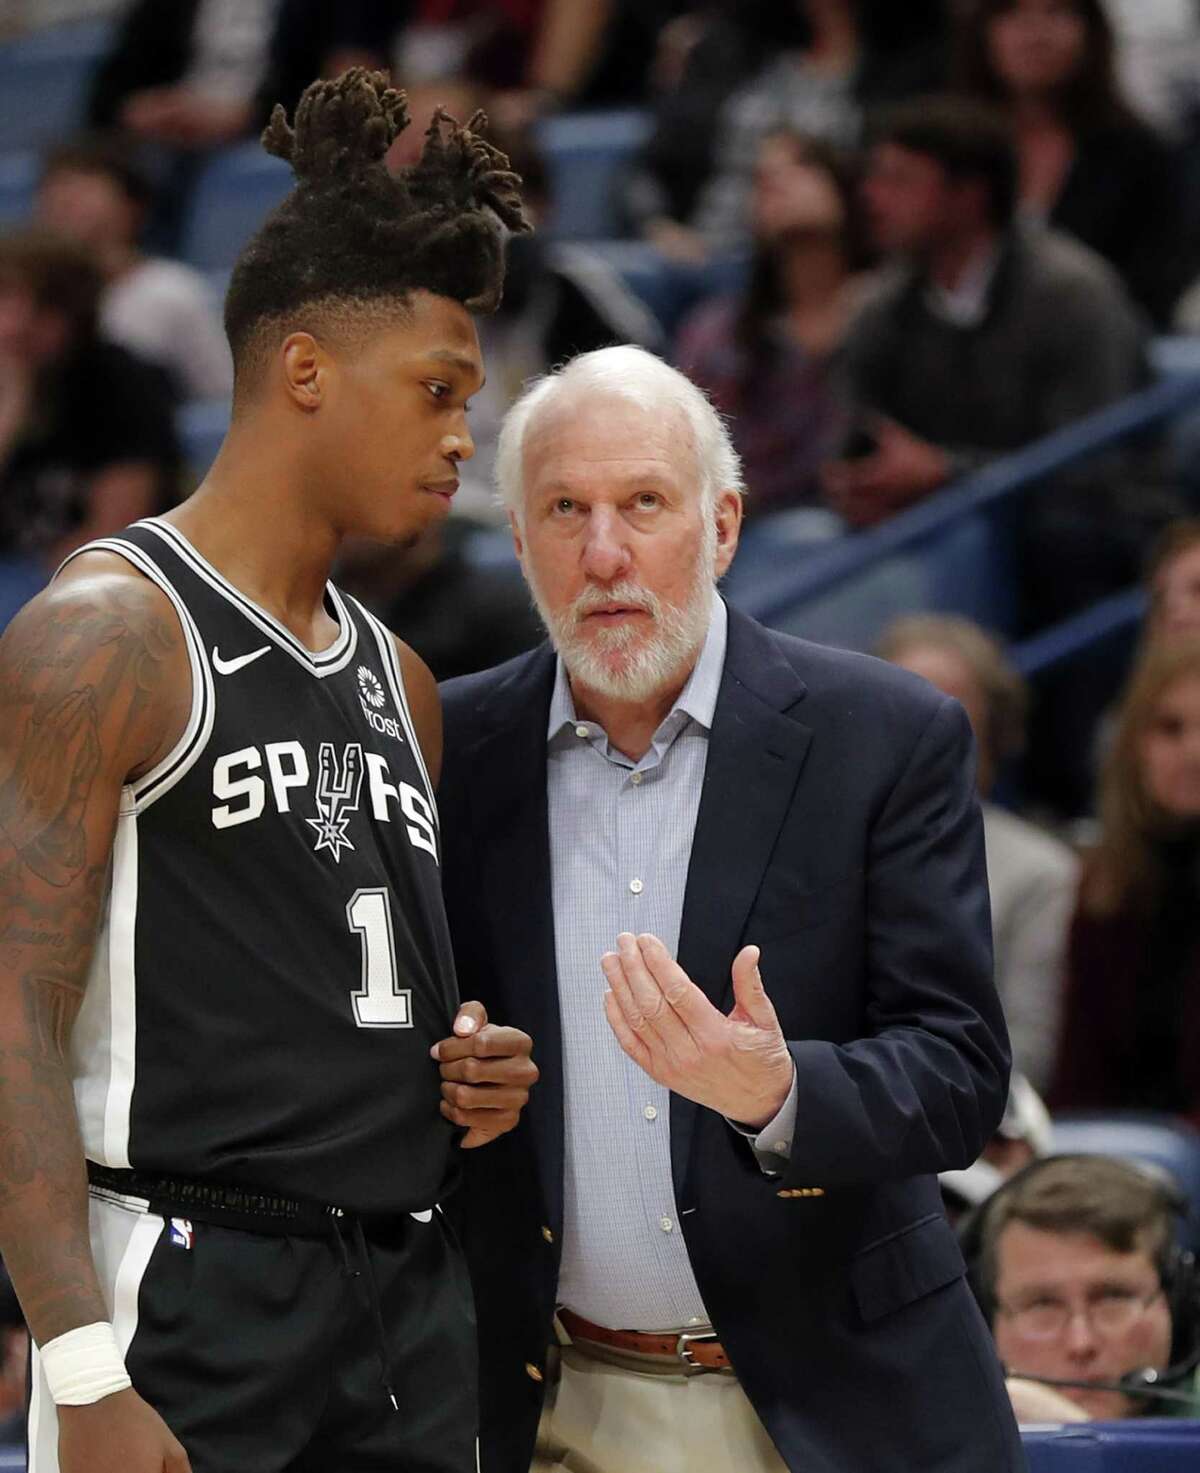 Spurs coach Gregg Popovich would like rookie guard Lonnie Walker IV to follow the same path as other Spurs have taken while improving in the G League.